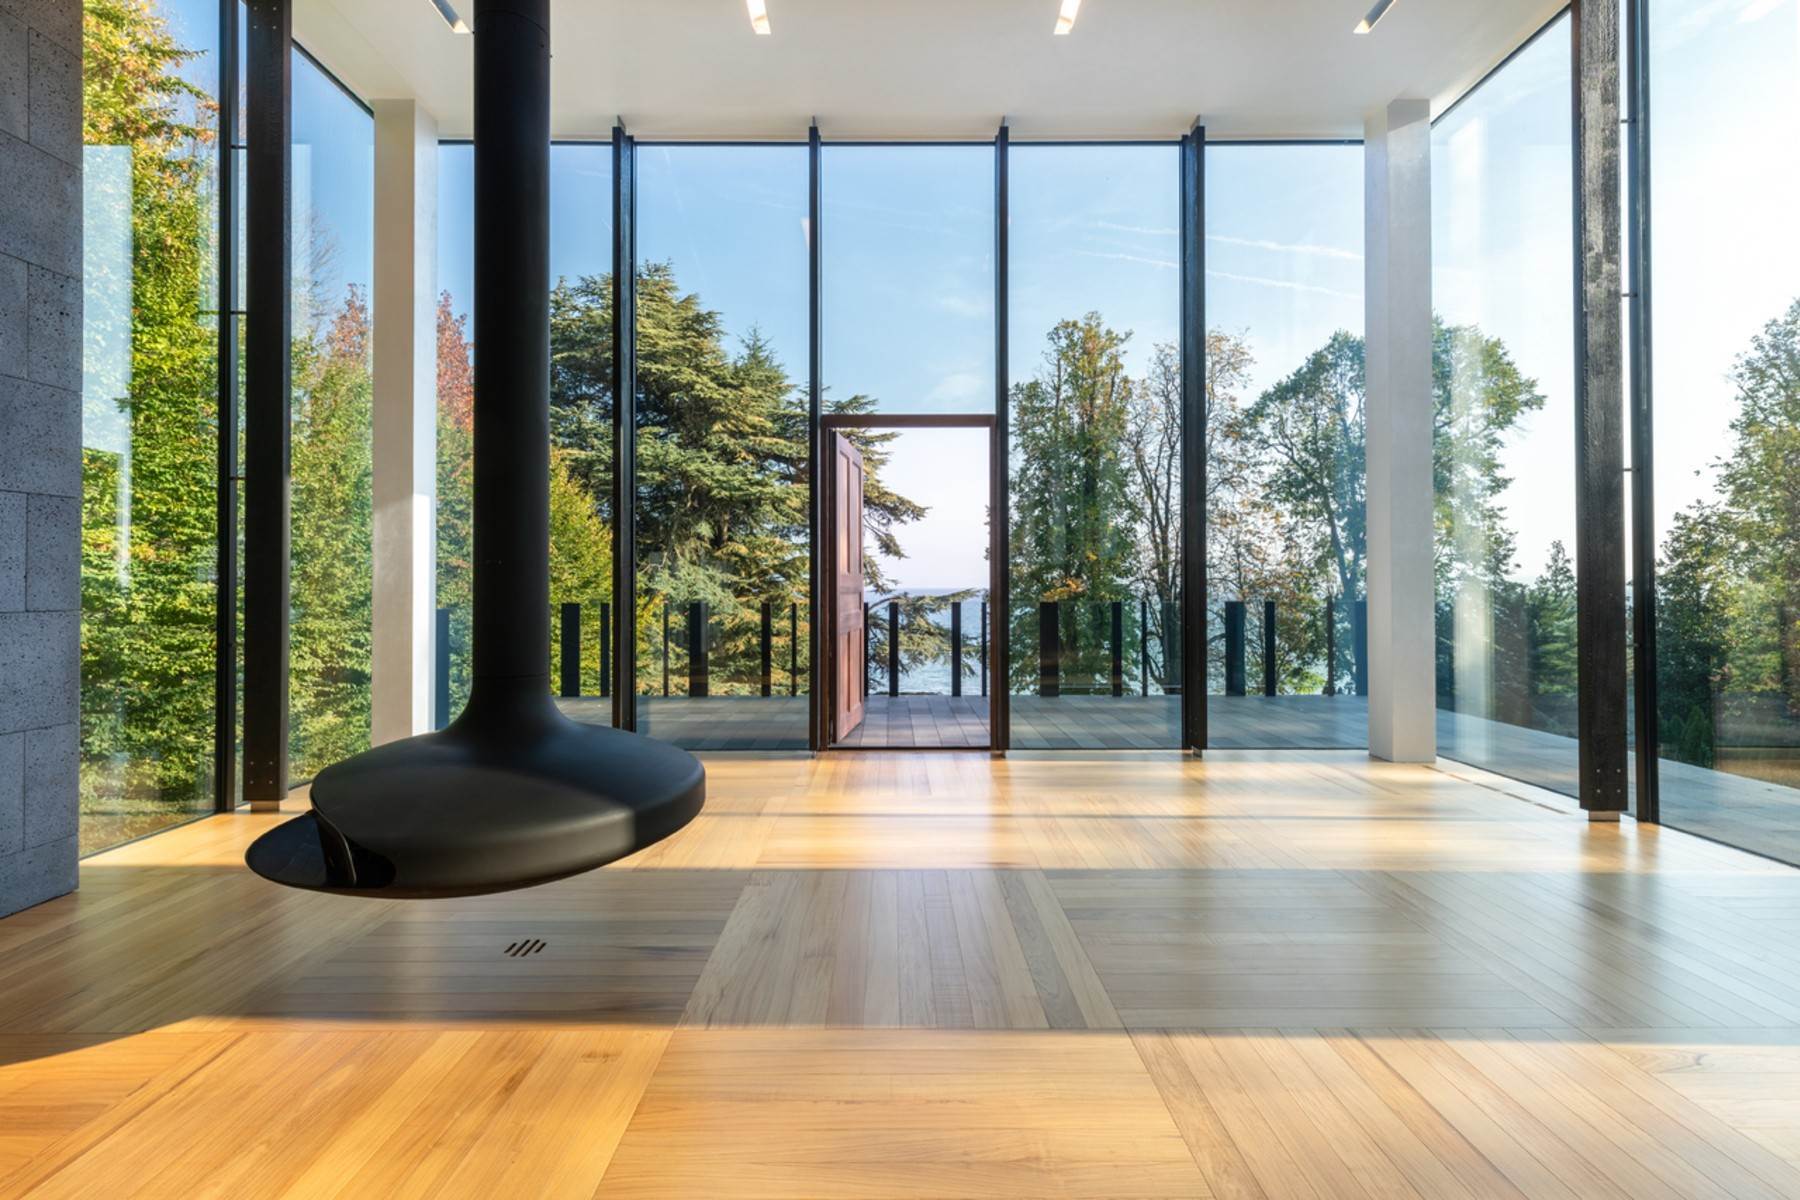 Single Family Homes for Sale at Stunning architect-designed house Stunning architect-designed house, Dully, Vaud 1195 Switzerland